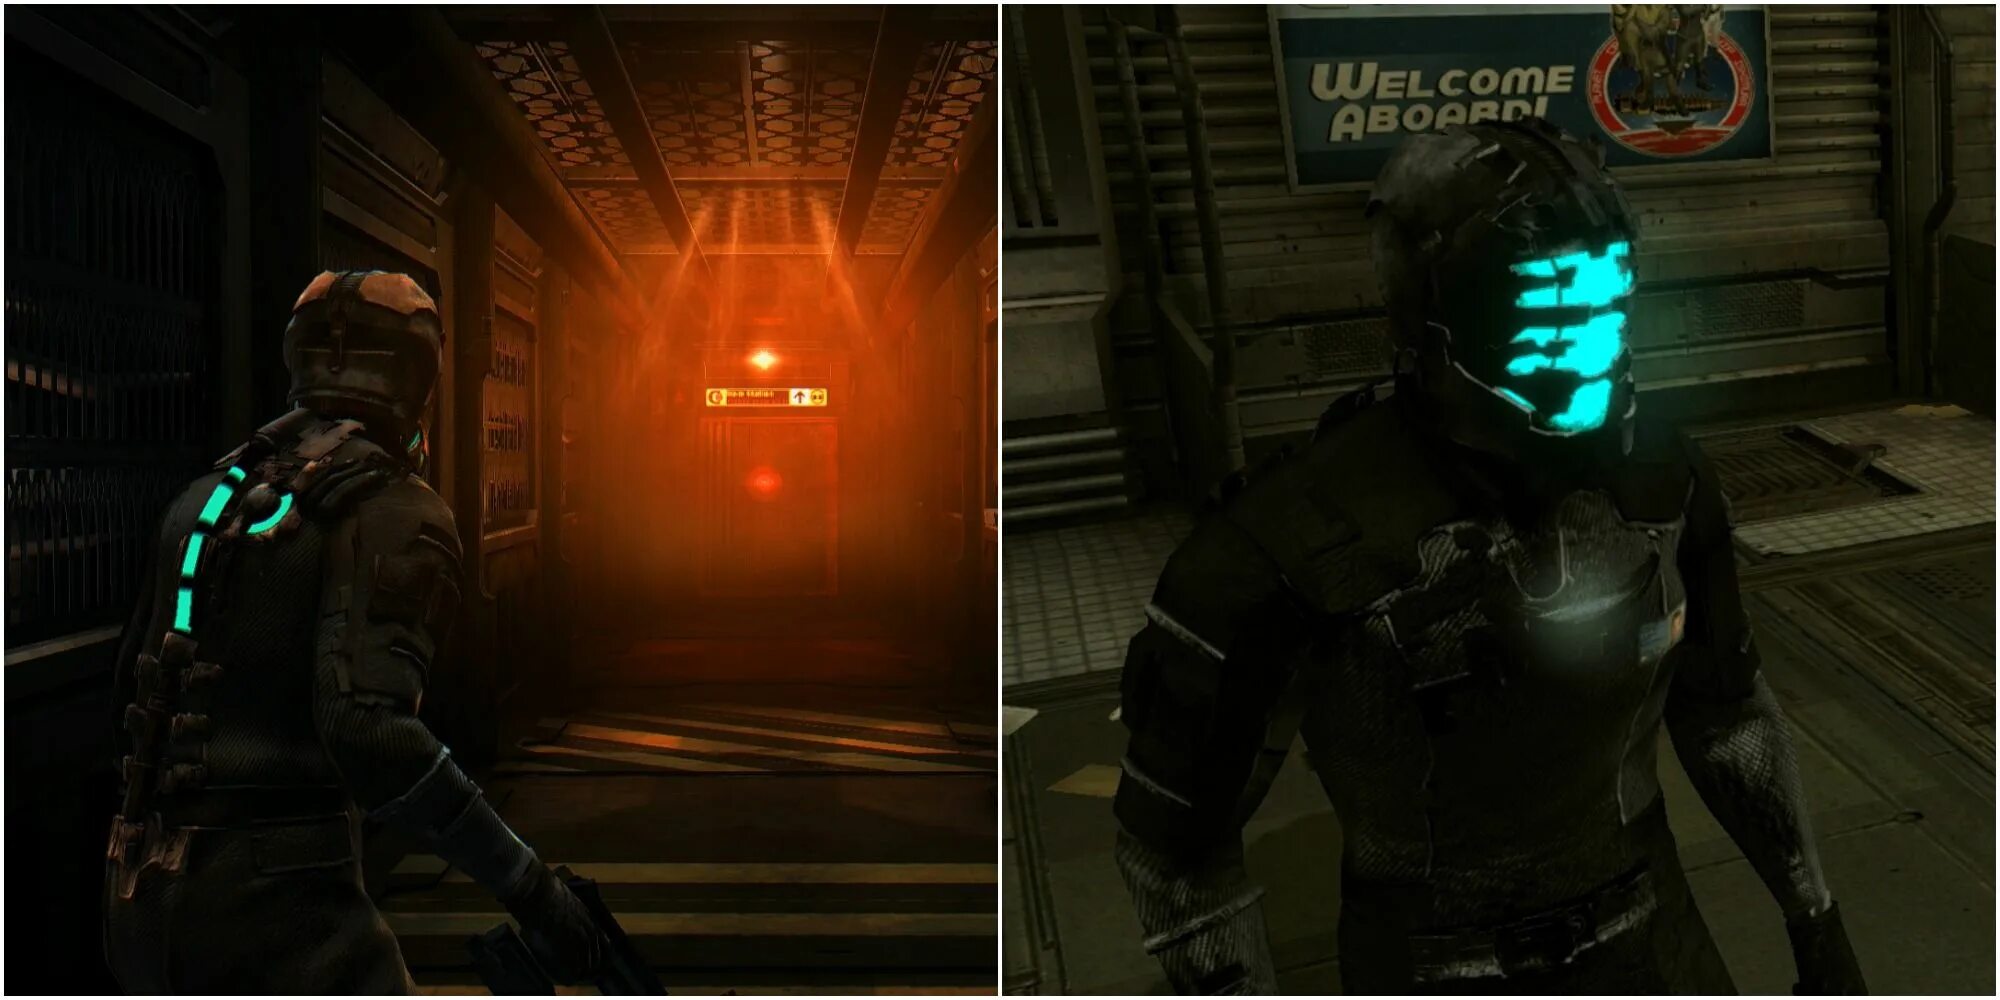 Dead Space моды. Dead Space 2 моды. Dead Space 1 мод. Dead Space 3 моды. Лучшая dead space